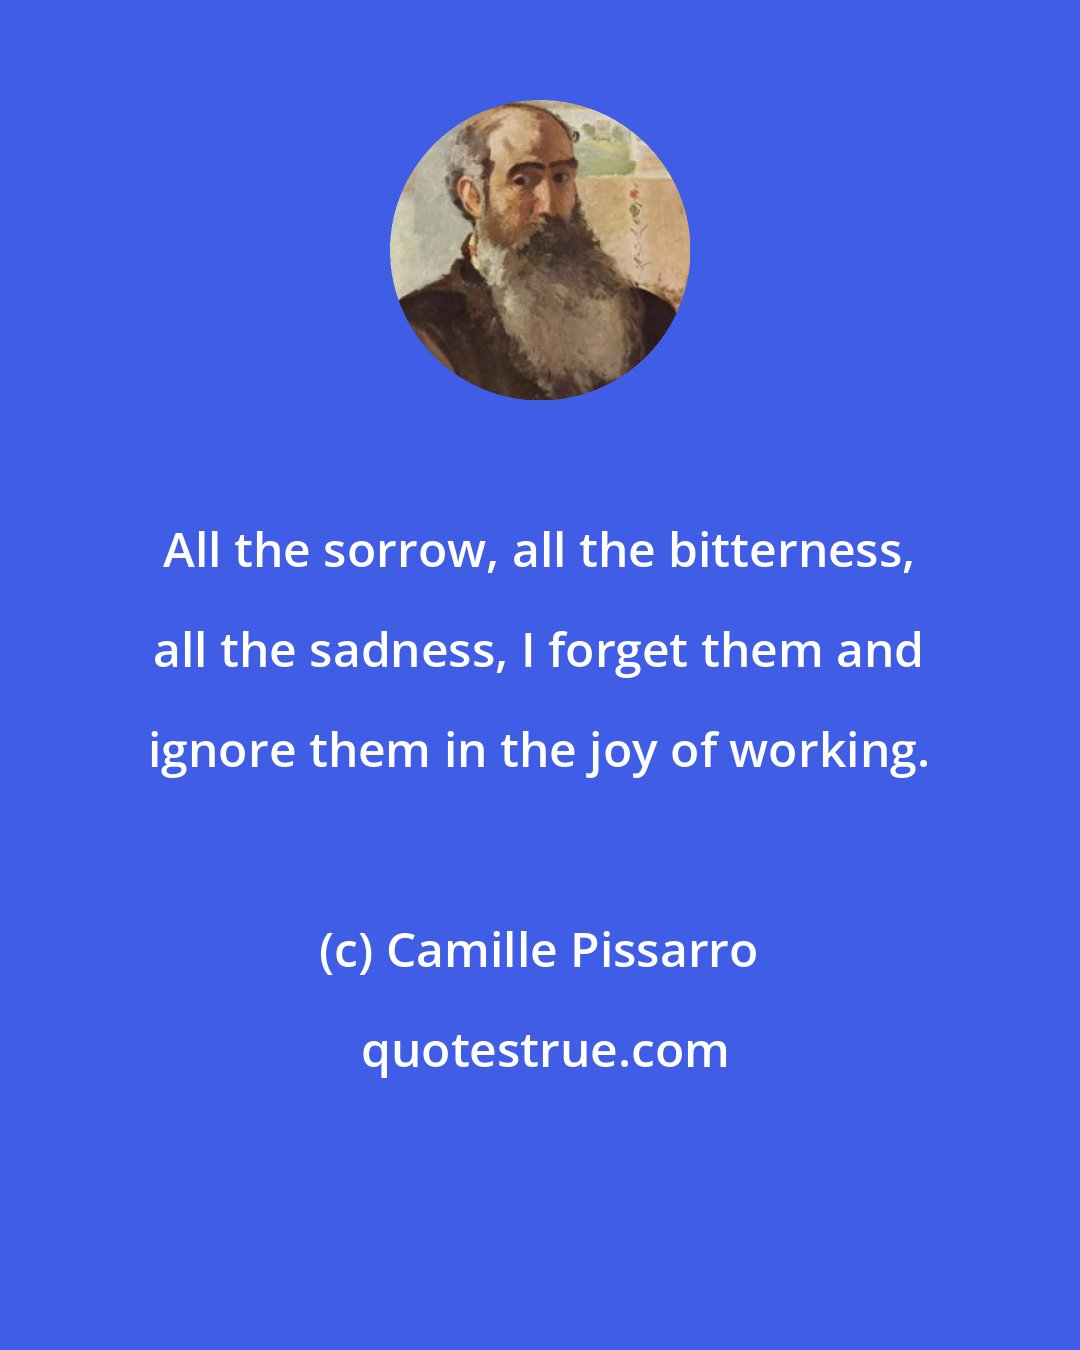 Camille Pissarro: All the sorrow, all the bitterness, all the sadness, I forget them and ignore them in the joy of working.